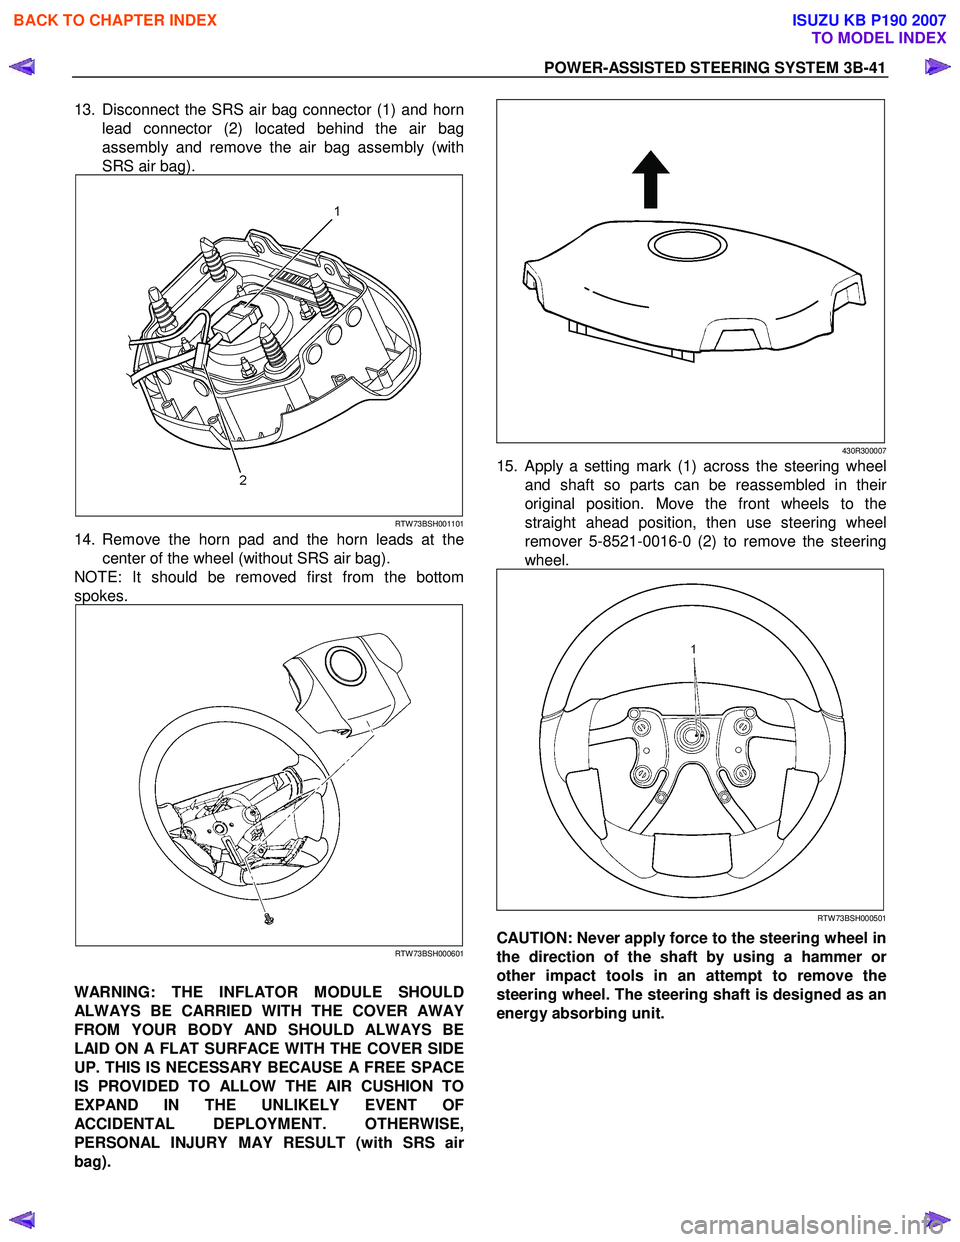 ISUZU KB P190 2007  Workshop Service Manual POWER-ASSISTED STEERING SYSTEM 3B-41 
13.  Disconnect the SRS air bag connector (1) and horn 
lead connector (2) located behind the air bag 
assembly and remove the air bag assembly (with 
SRS air bag